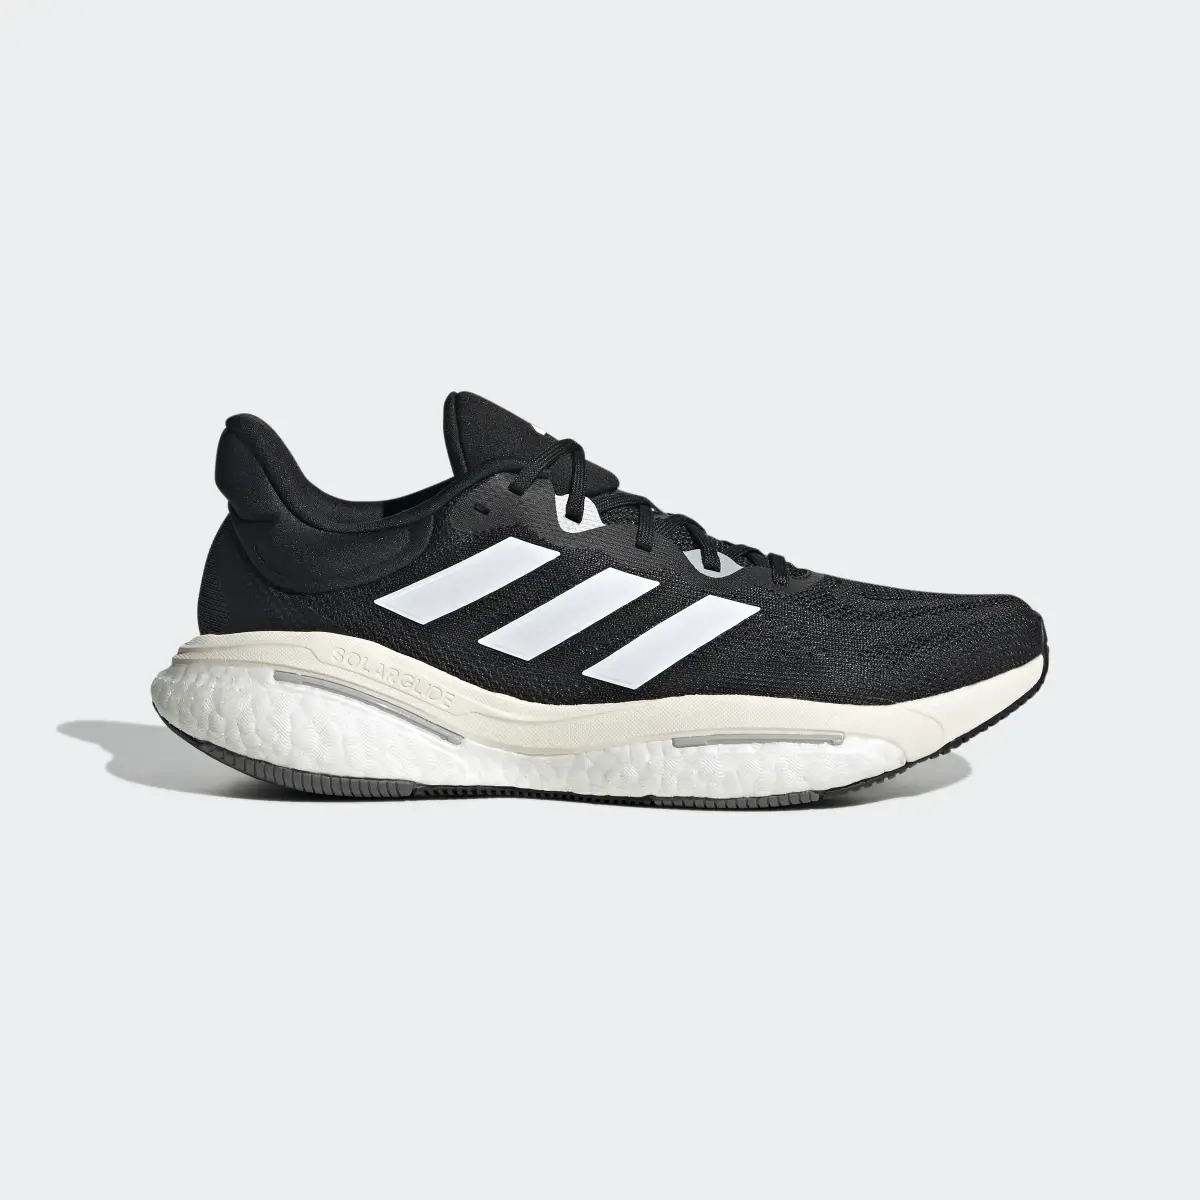 Adidas SOLARGLIDE 6 Shoes. 2